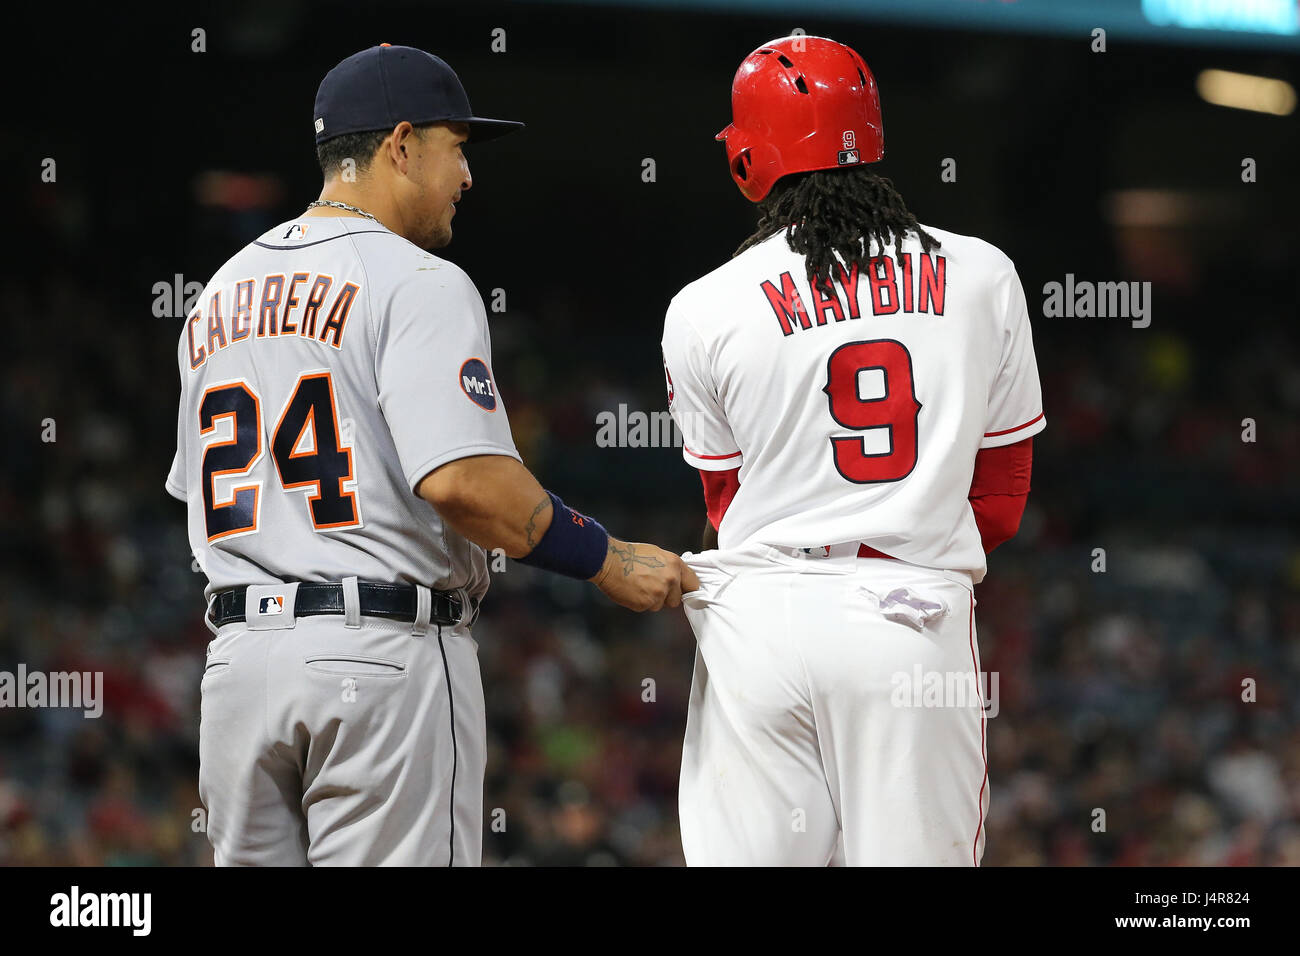 May 11, 2017: Detroit Tigers first baseman Miguel Cabrera #24 jokingly tried to keep Los Angeles Angels left fielder Cameron Maybin #9 from stealing by holding onto his pocket in the game between the Detroit Tigers and Los Angeles Angels of Anaheim, Angel Stadium in Anaheim, CA, Stock Photo